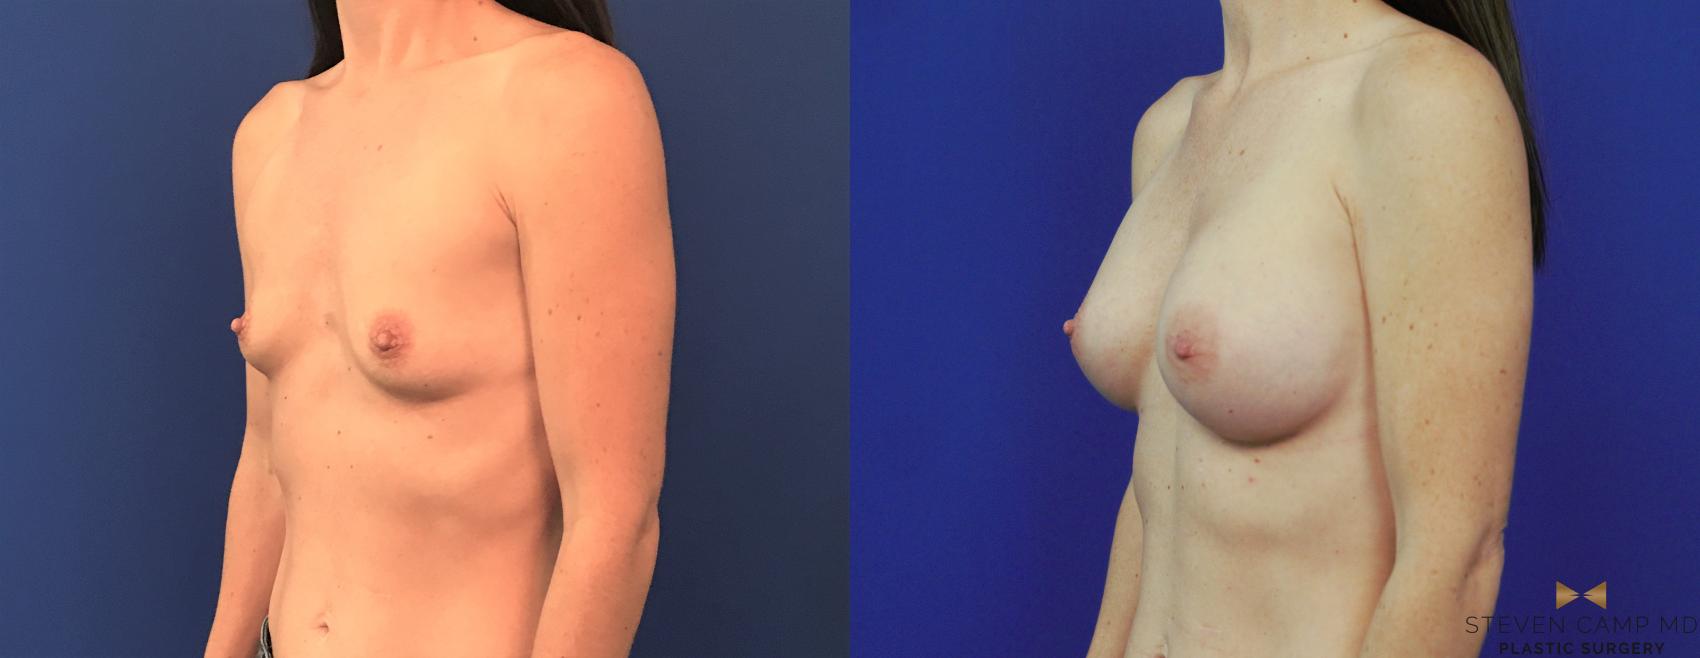 Before & After Case3008 by Steven Camp MD Plastic Surgery & Aesthetics, in Fort Worth